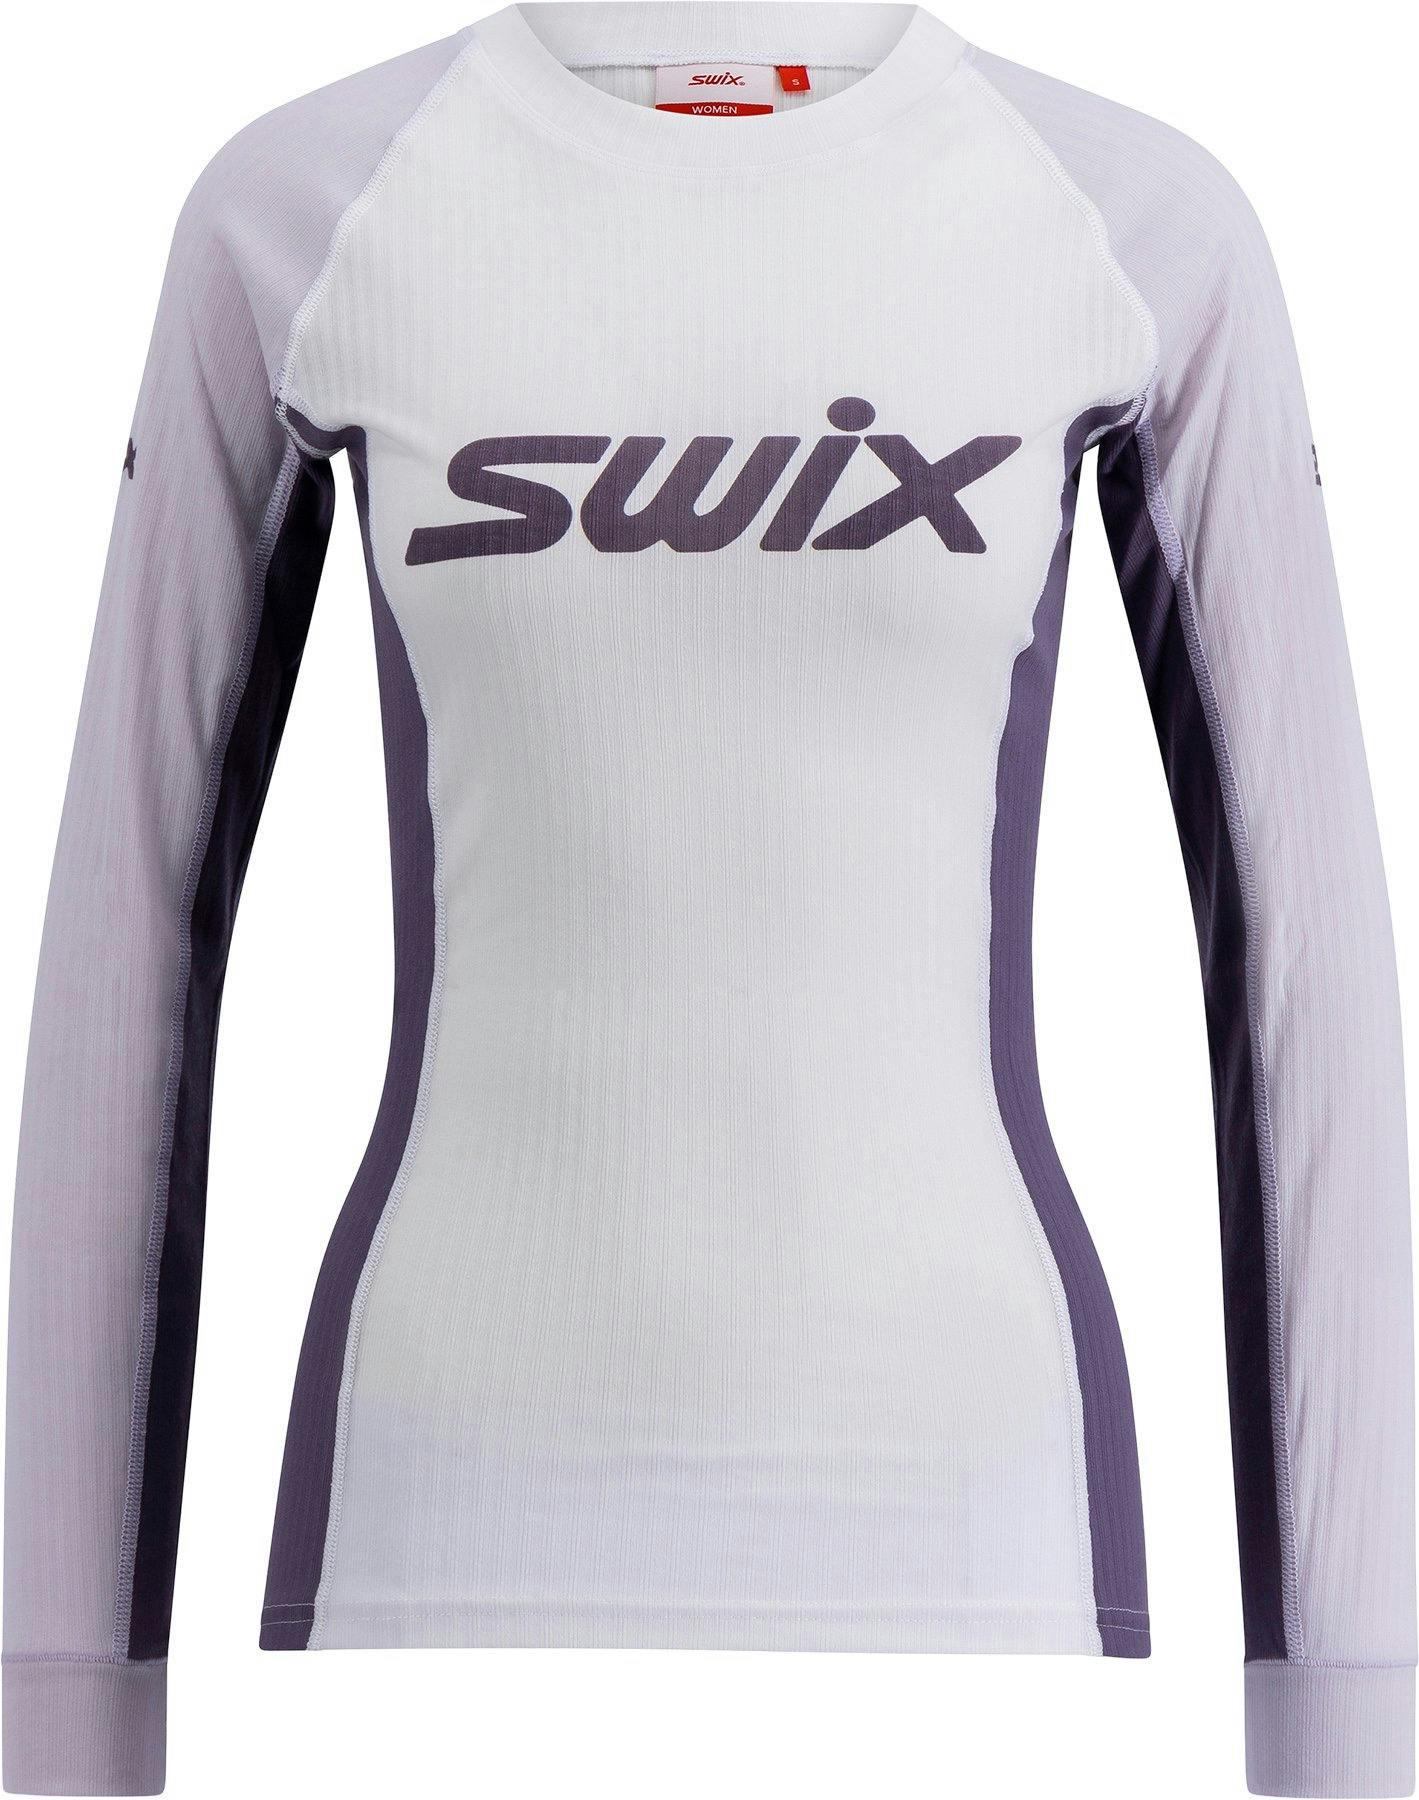 Product image for Racex Classic Long Sleeve - Women's